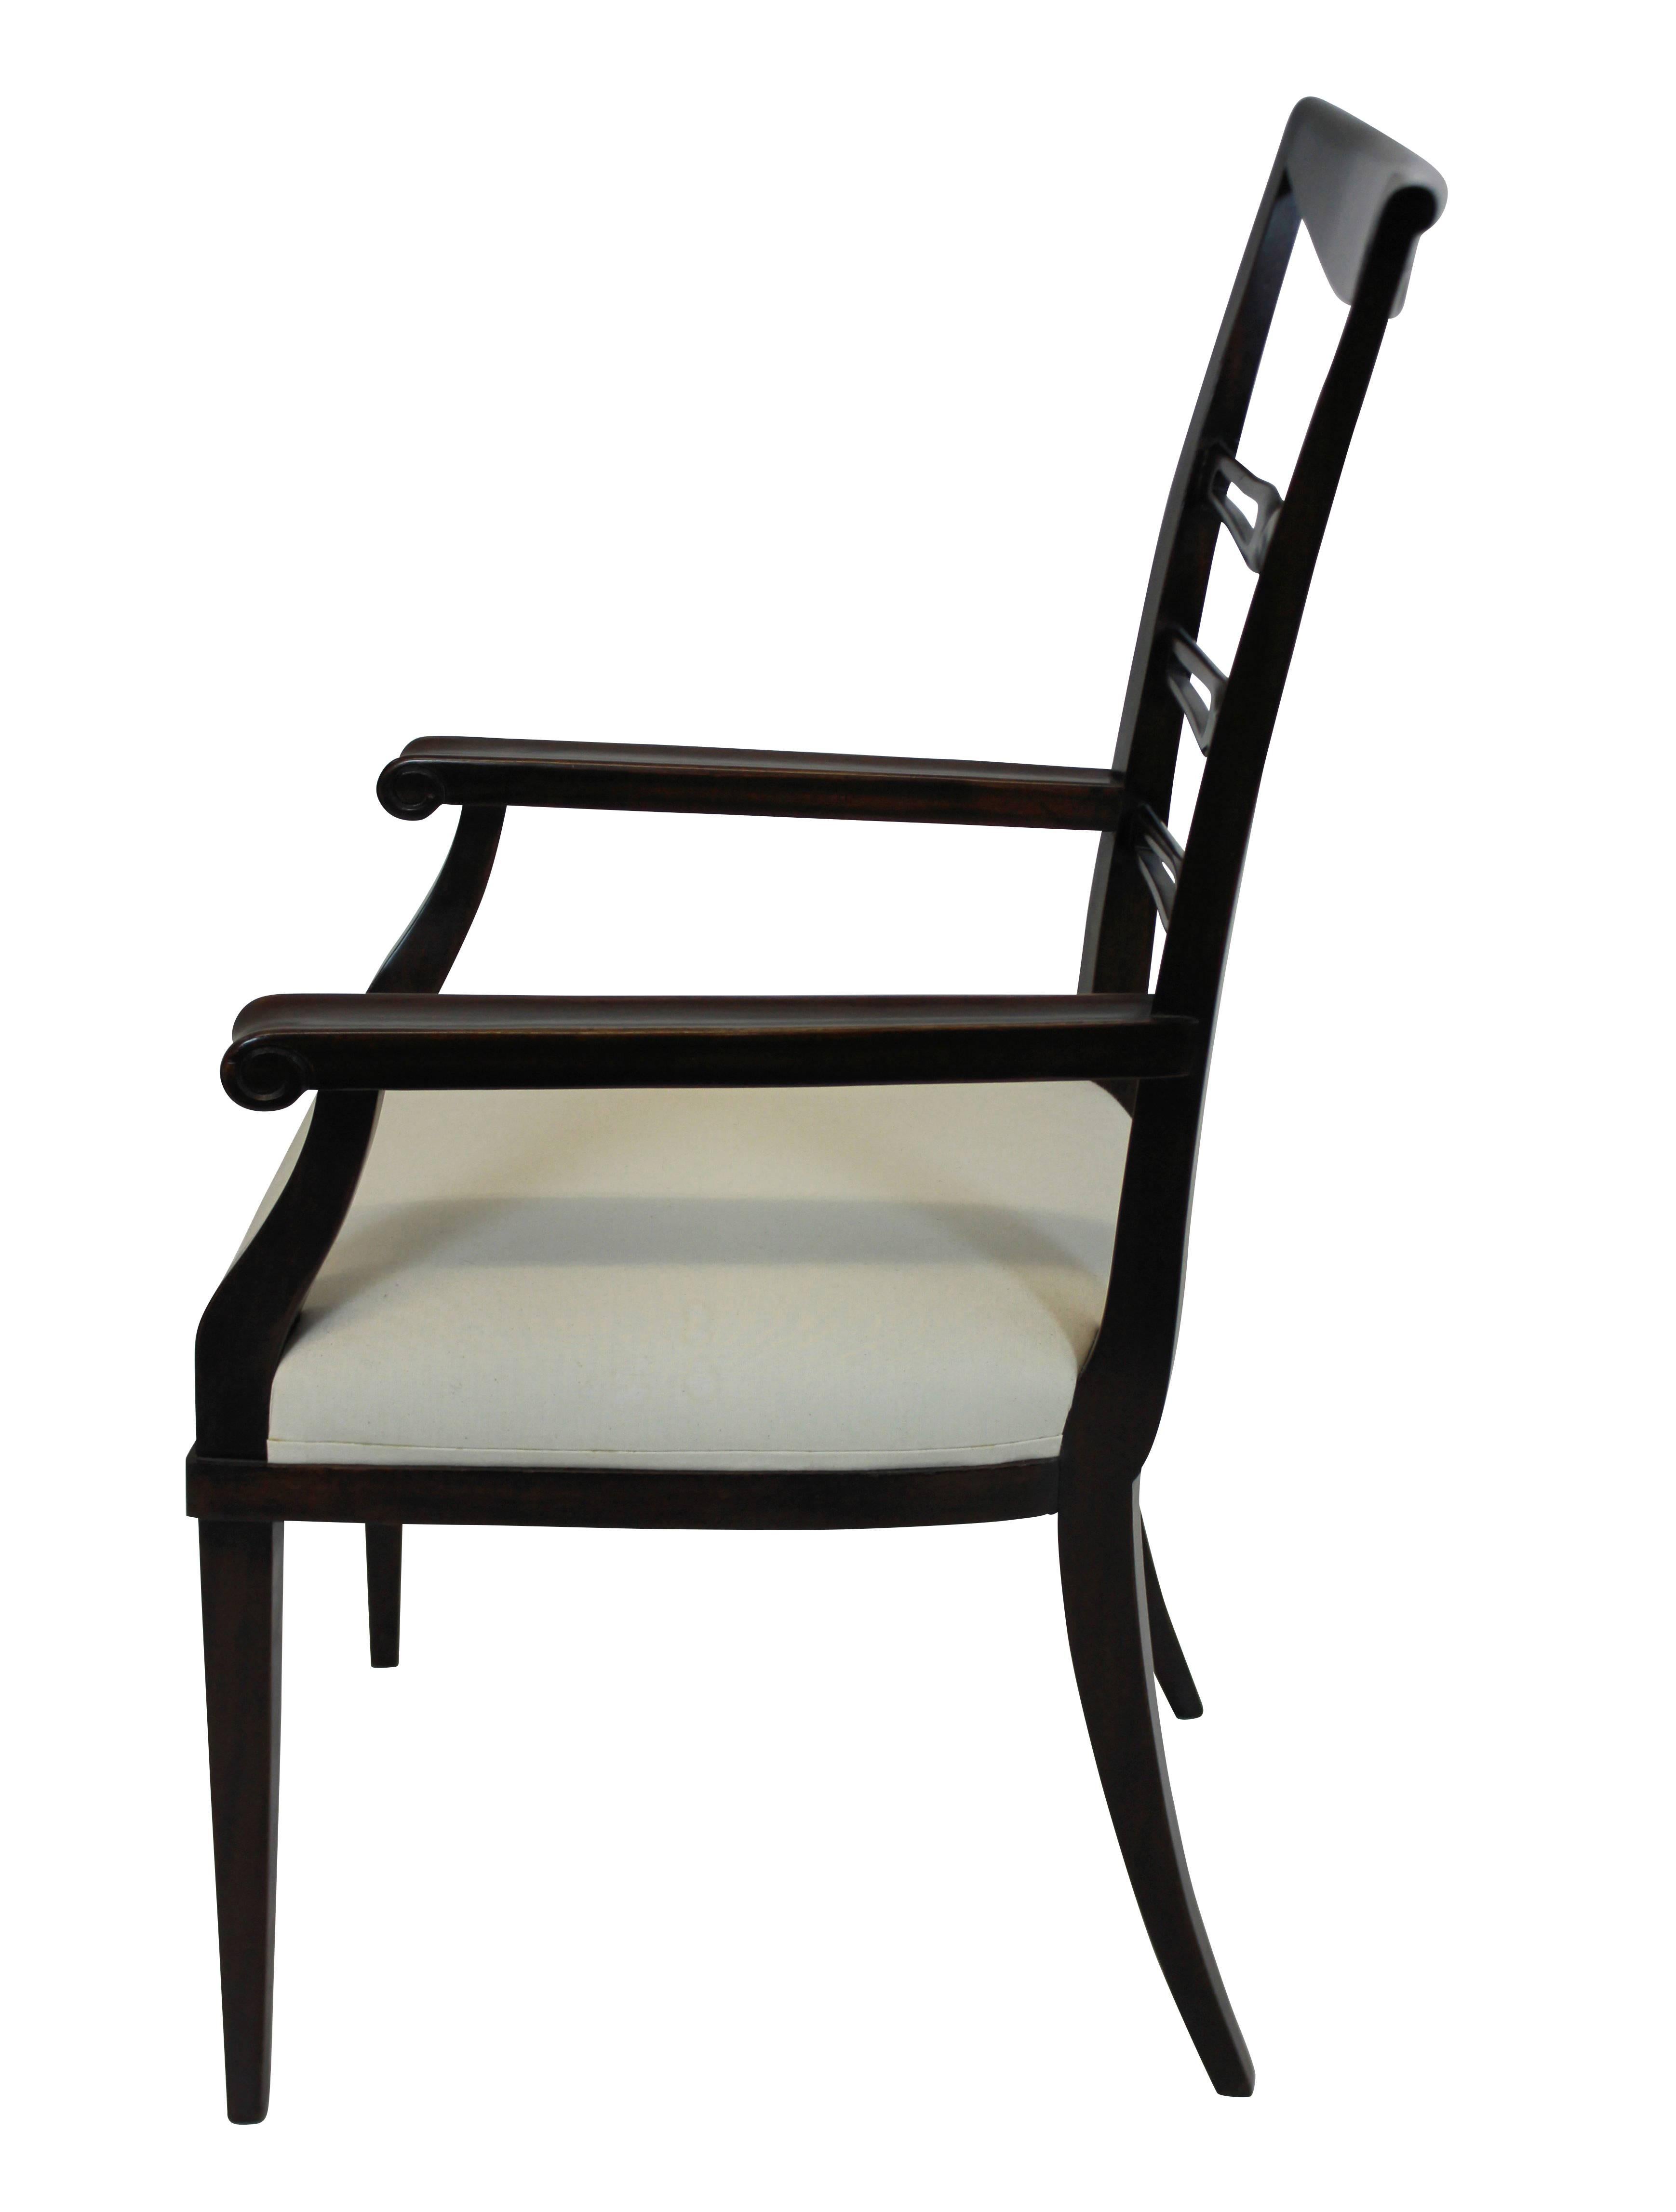 An Italian armchair in cherry wood by Paolo Buffa of fine quality. Newly upholstered in white Fermoie linen.
